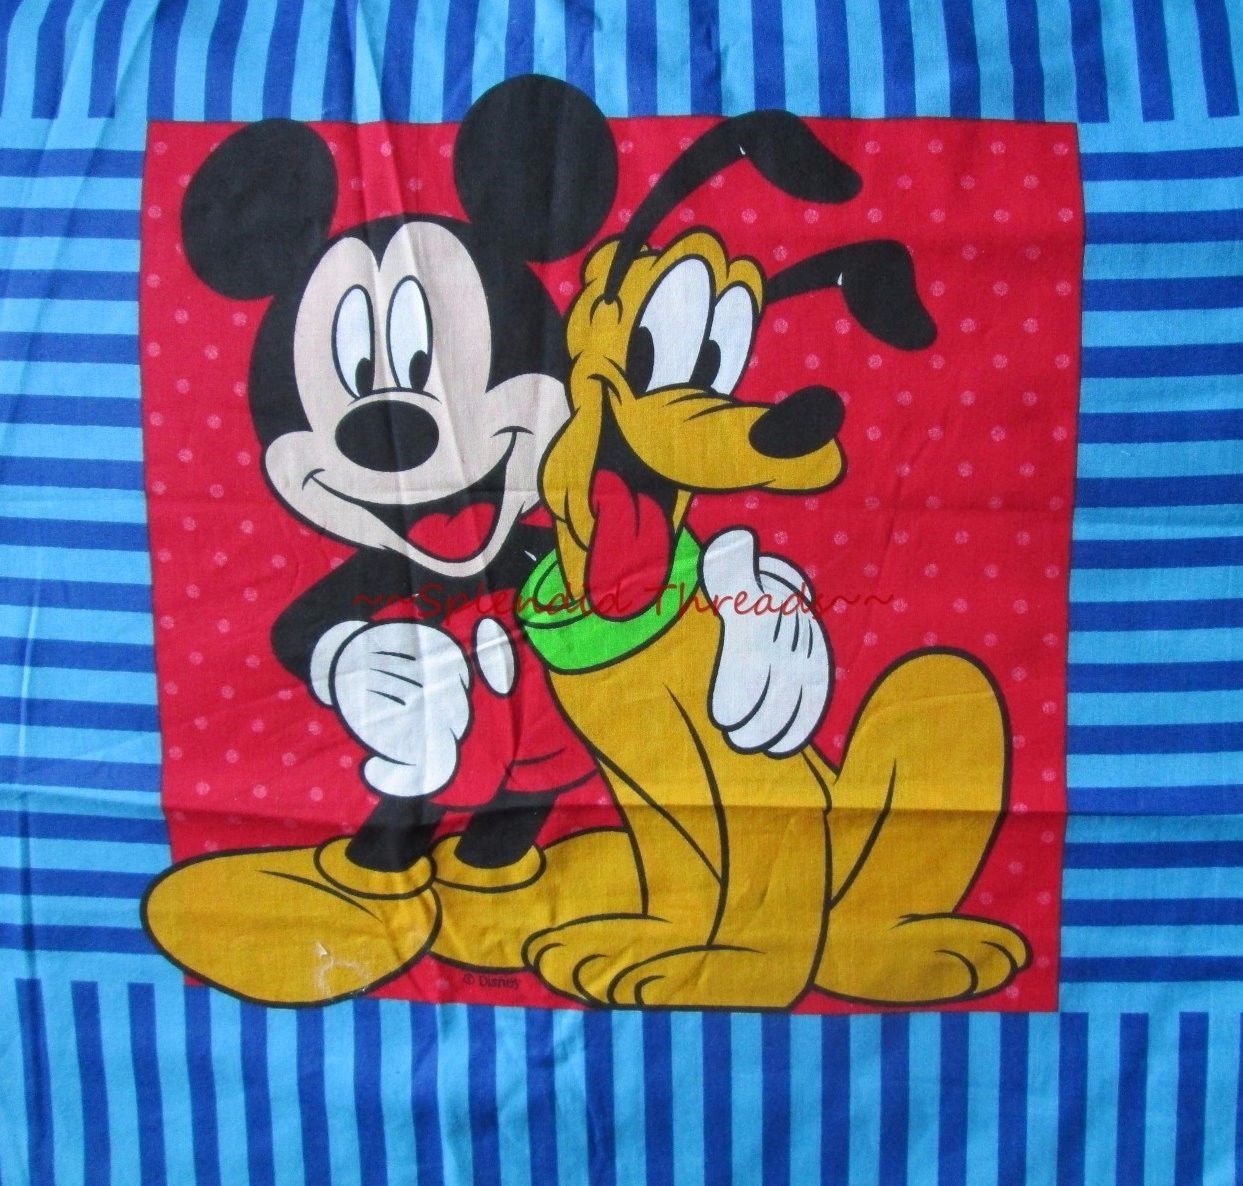 St. Louis Cardinals Baby Blanket Limited Edition Mickey Mouse 